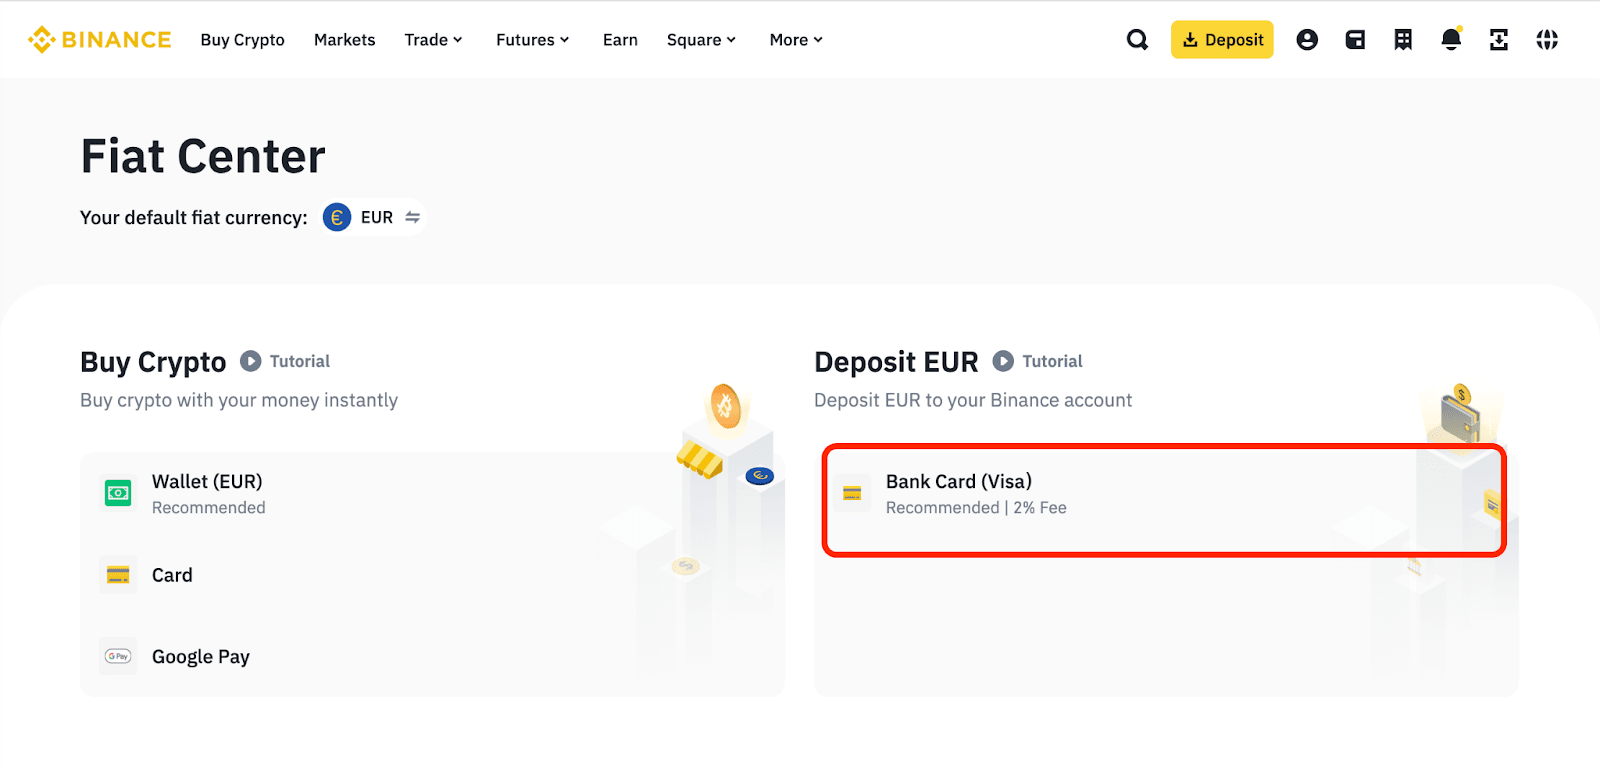 How to deposit and withdraw money in Binance